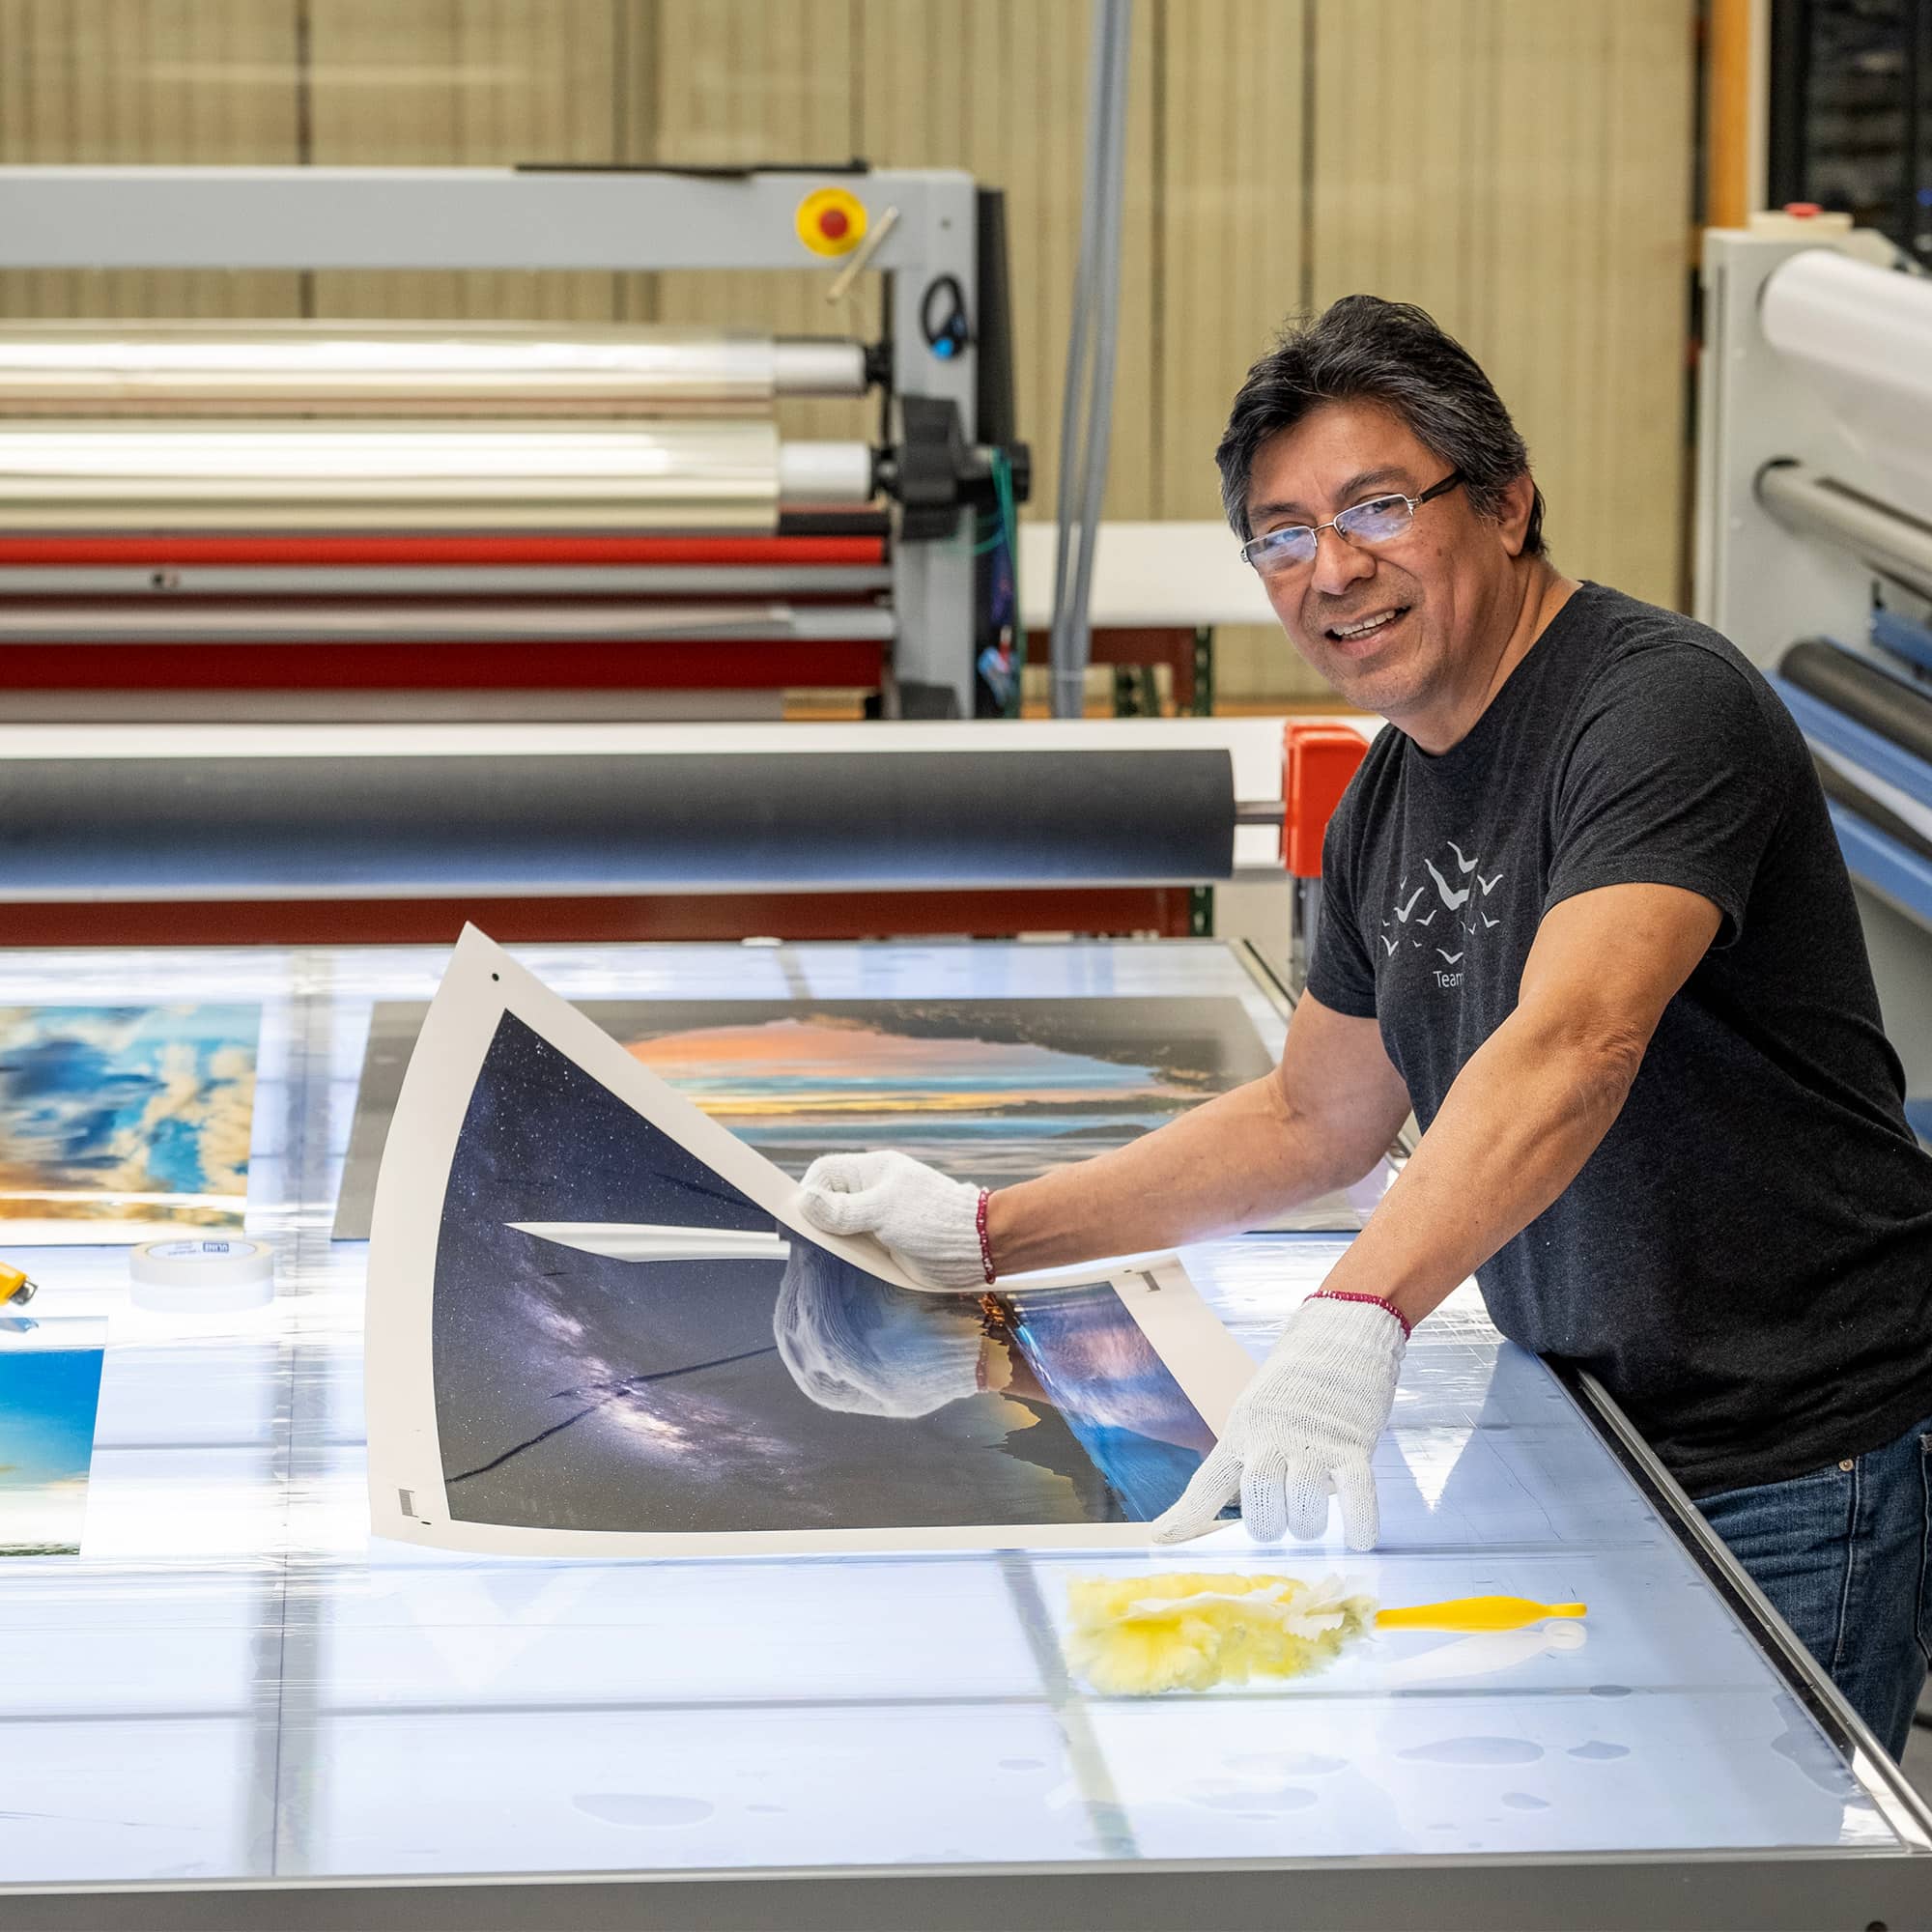 A worker looks at a metal print